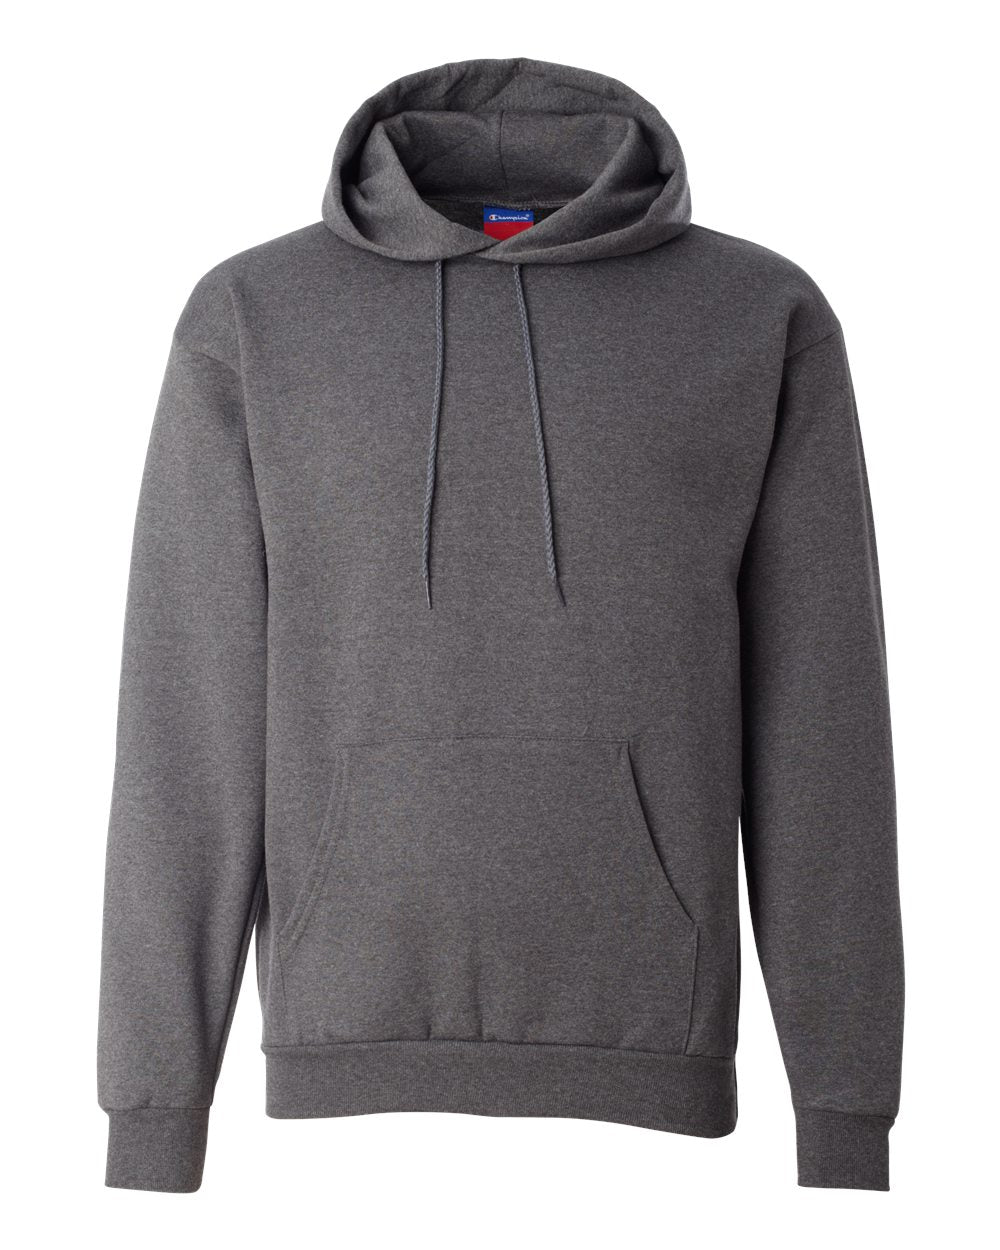 Champion Hoodie S700 in Charcoal Heather